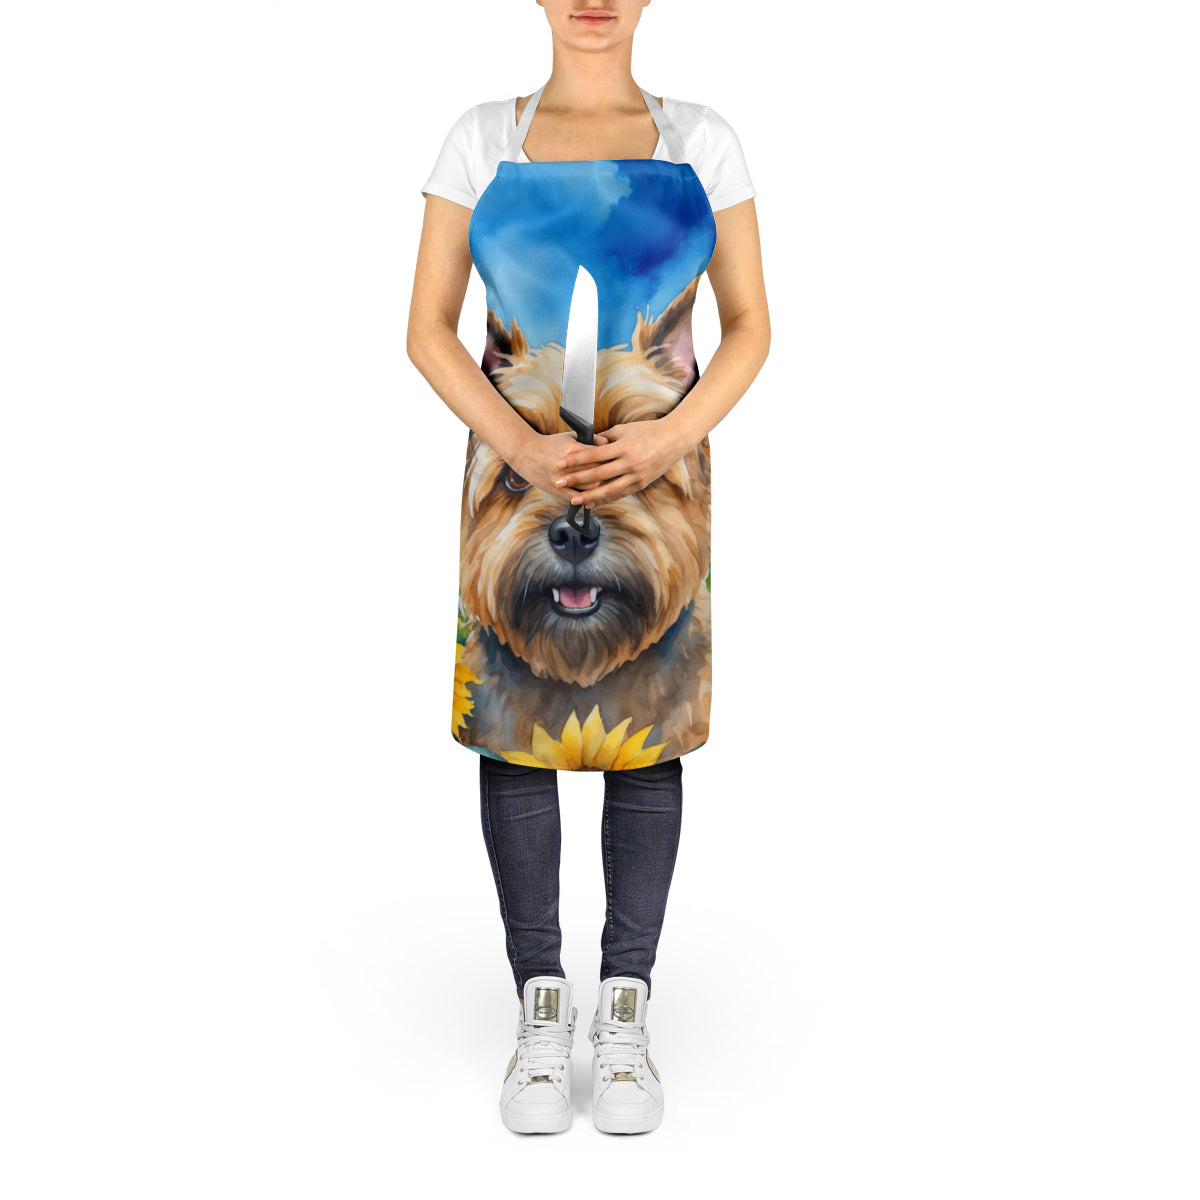 Cairn Terrier in Sunflowers Apron